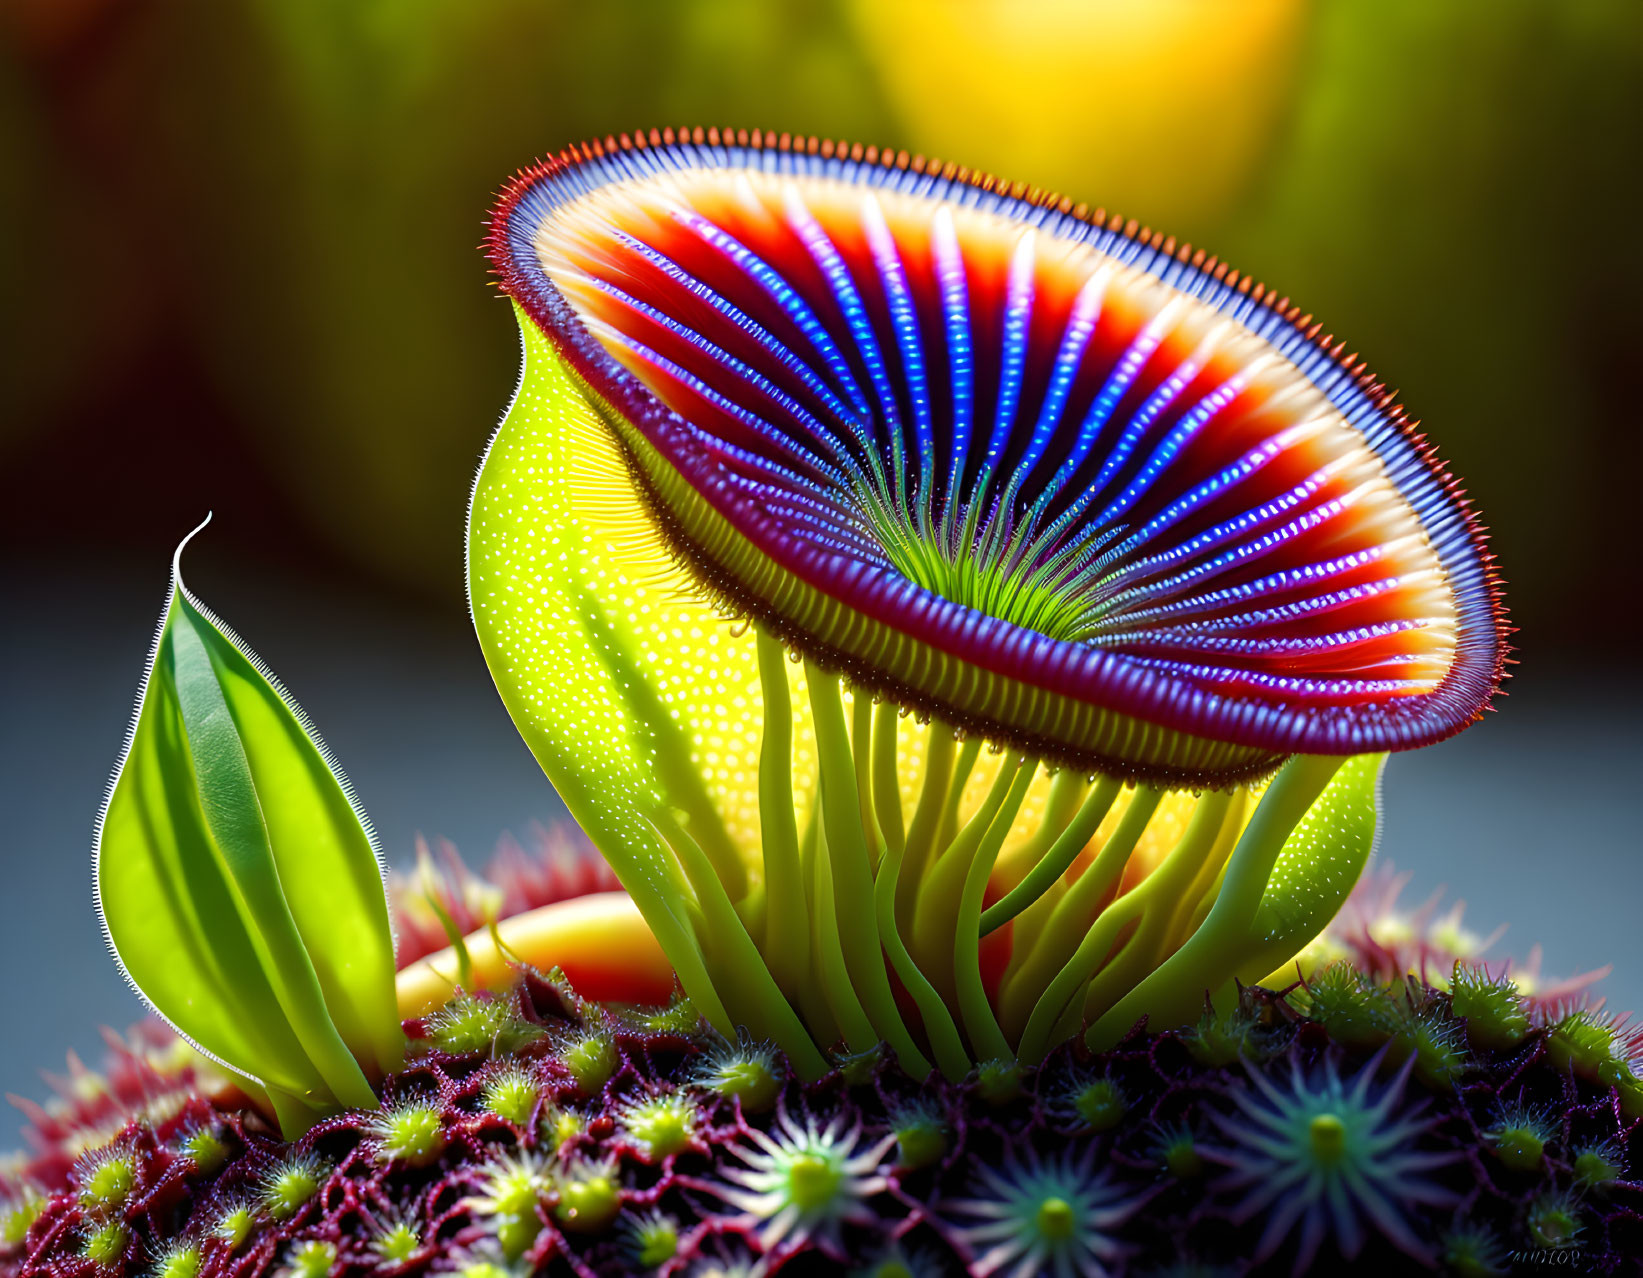 Neon-blue and red fantasy plant with mushroom-like cap and spiky base